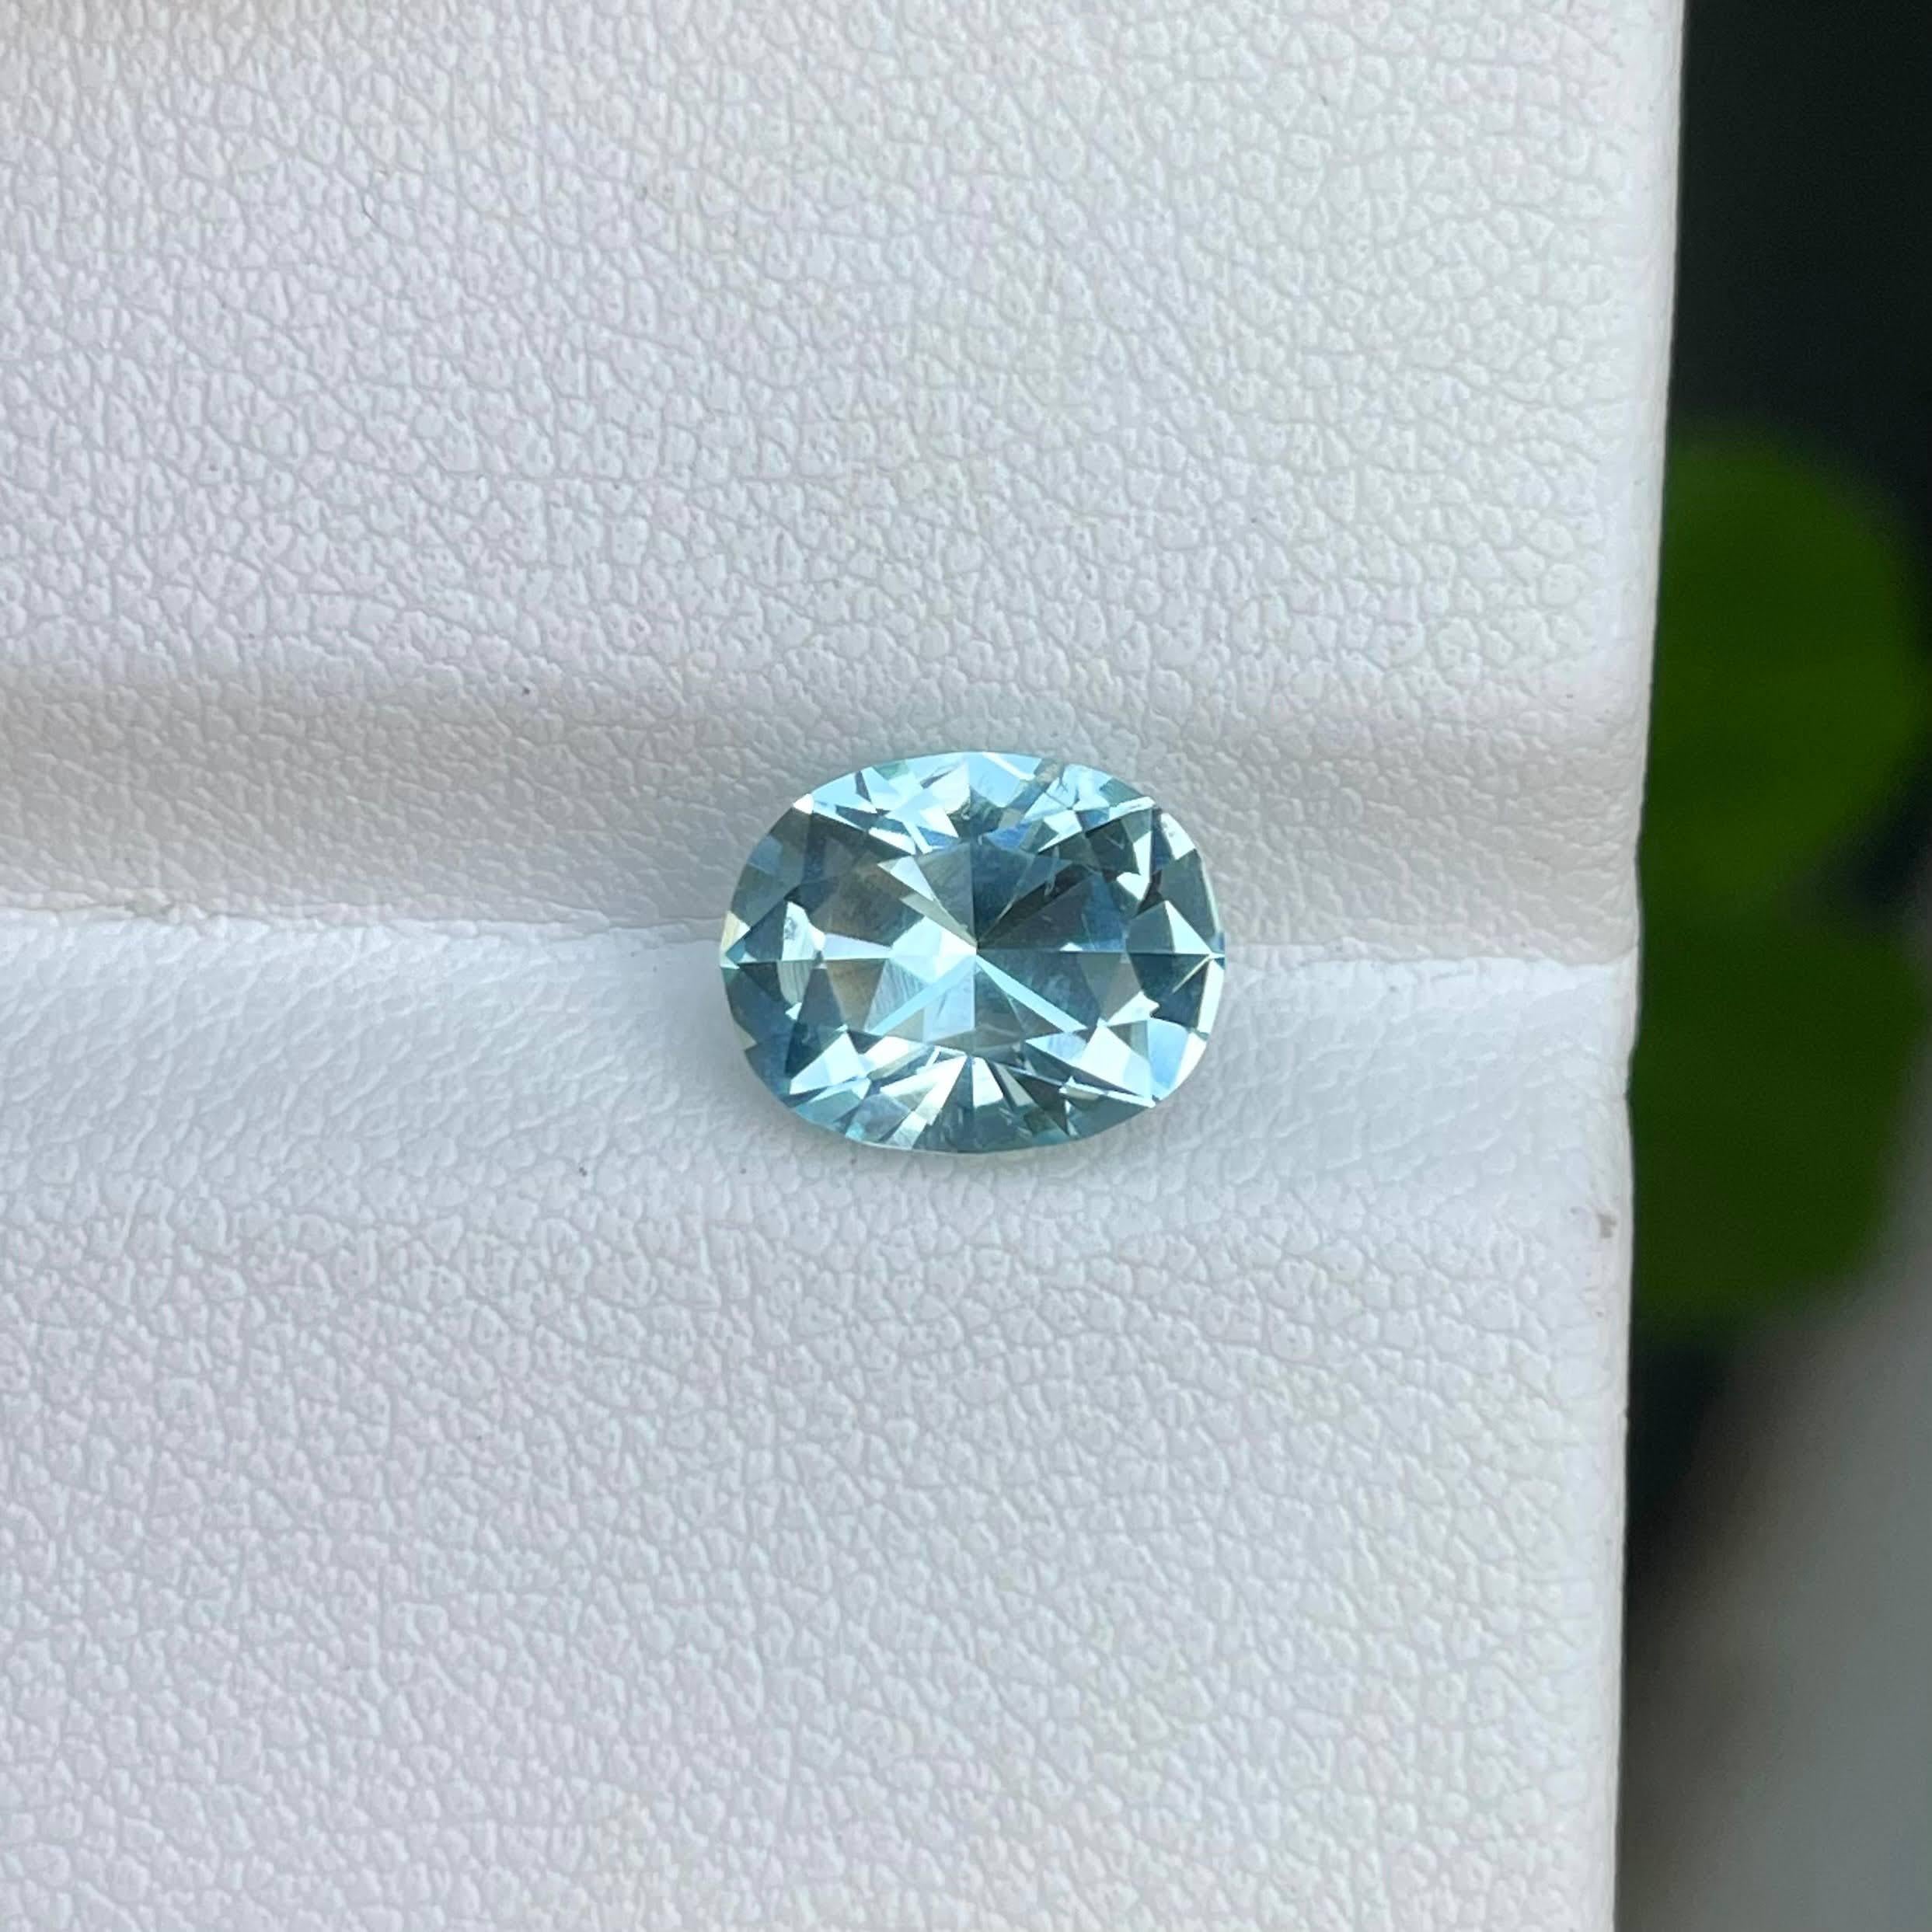 Weight 2.30 carats 
Dimensions 9.39x7.45x7.78 mm
Treatment None
Origin Madagascar
Clarity Eye Clean
Shape Oval
Cut Oval Mix




Nestled gracefully in a harmonious composition, a mesmerizing 2.30-carat sea-blue Aquamarine takes center stage,